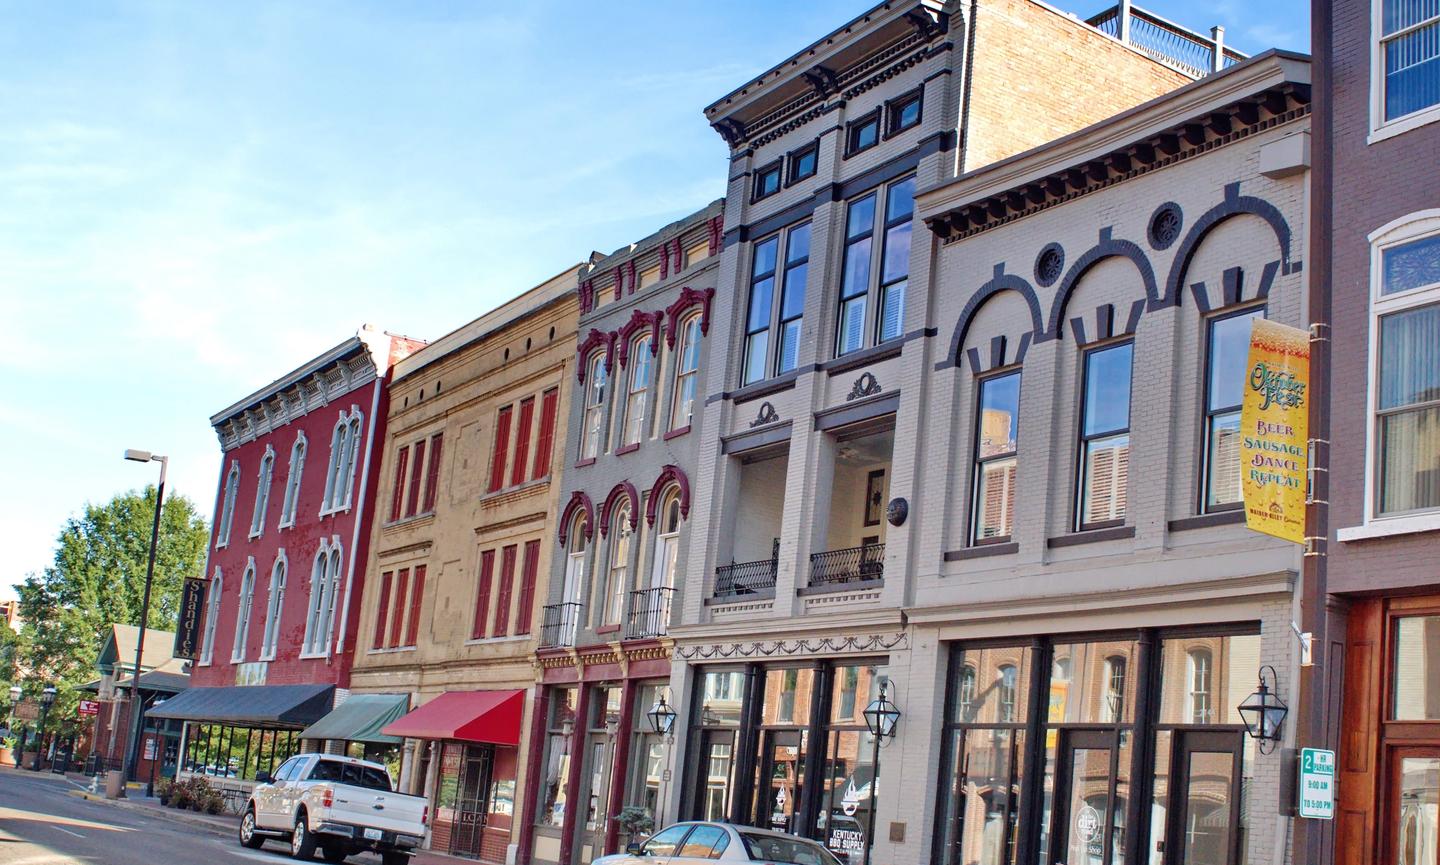 Historic downtown Paducah is home to a variety of shops, museums and restaurants. Photo credit: Angela N Perryman / Shutterstock.com